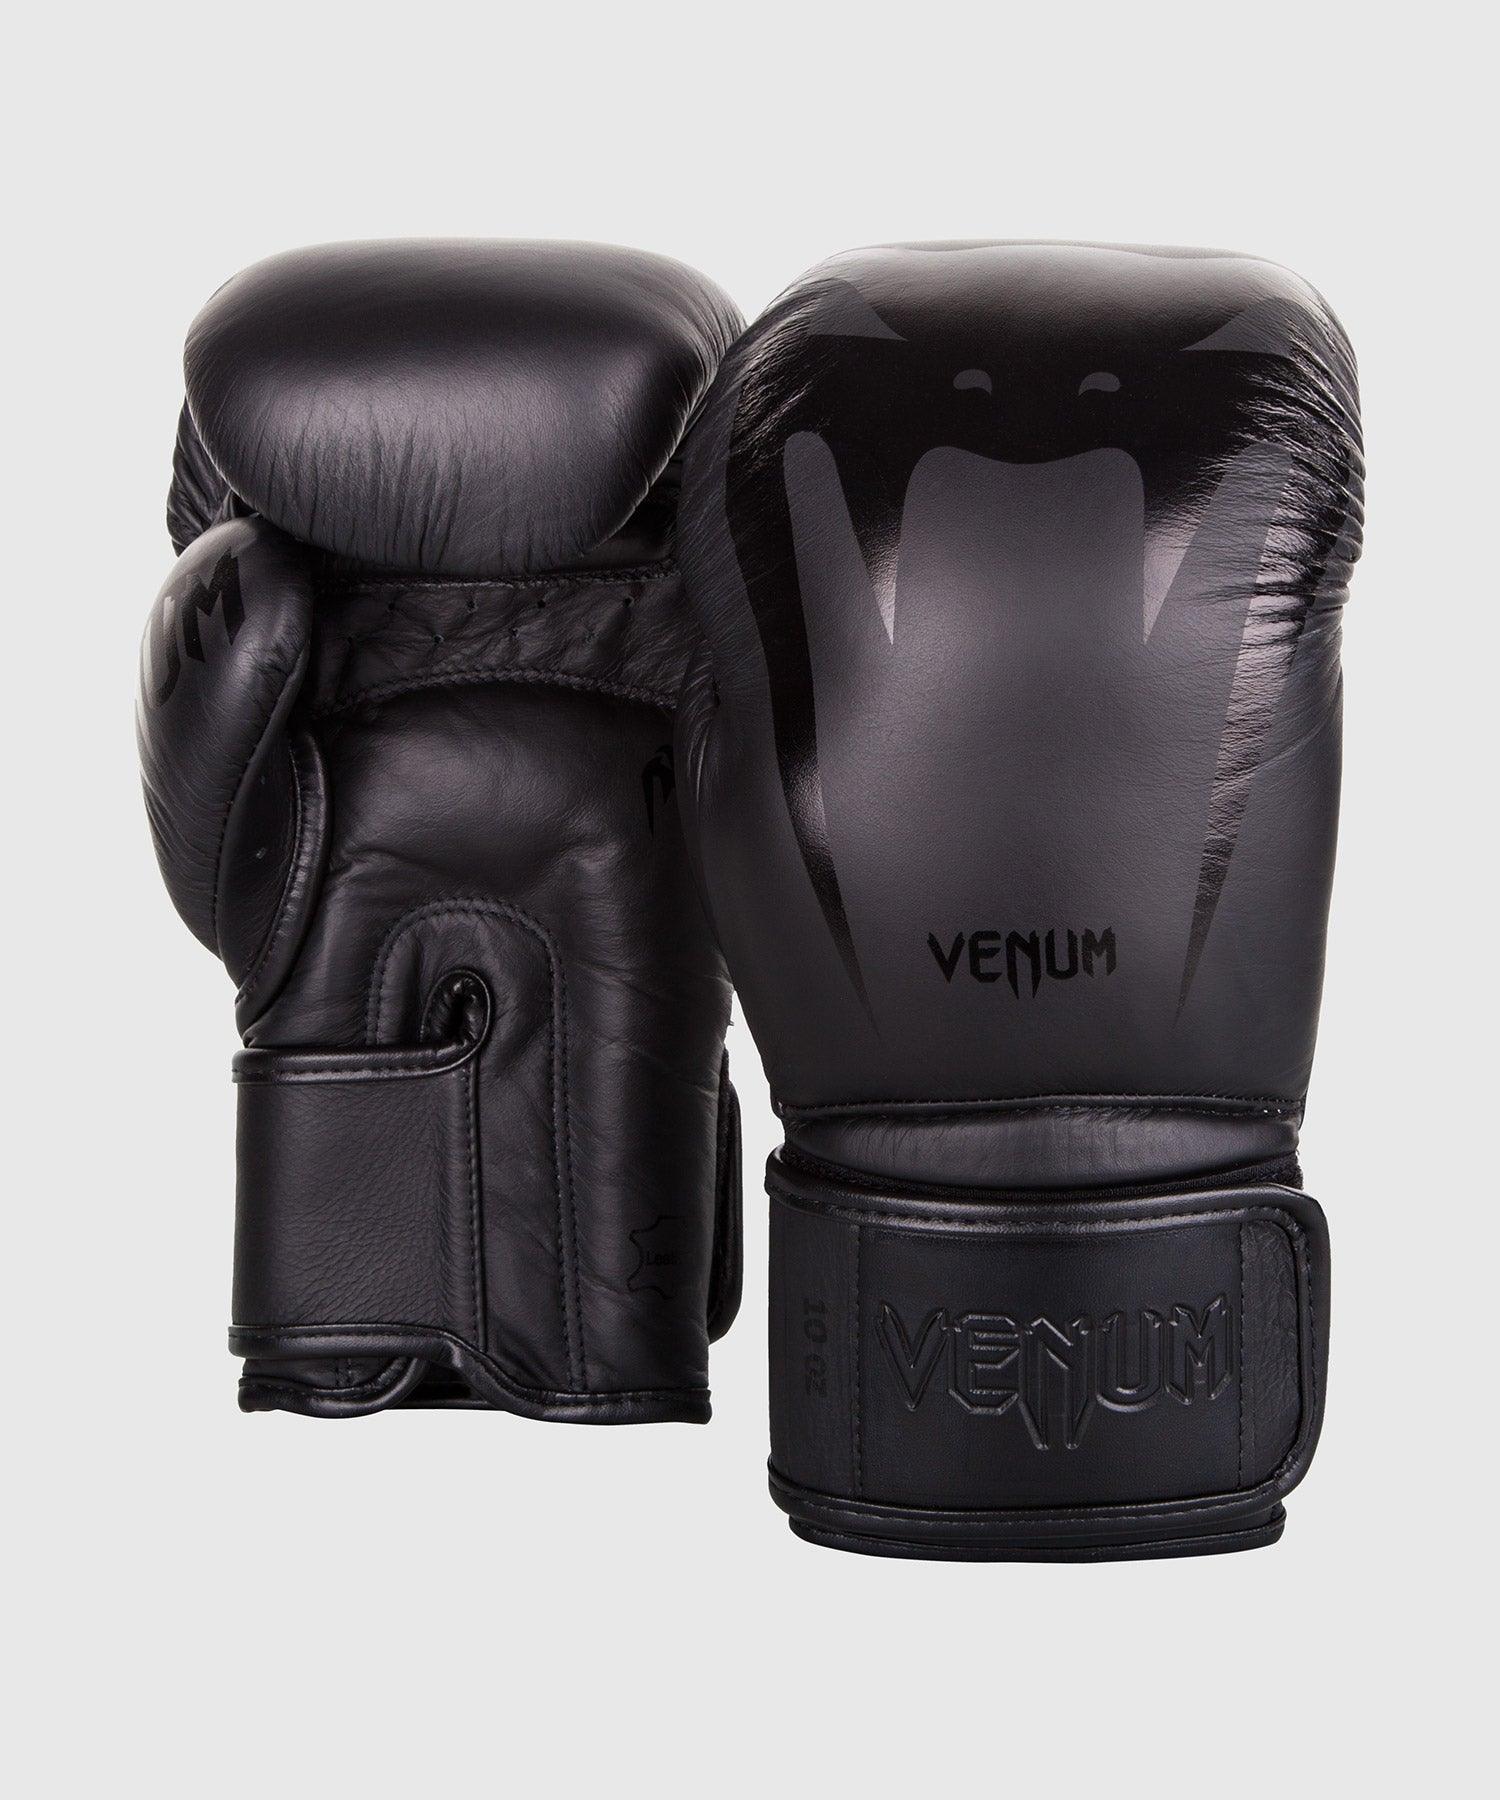 Venum Giant 3.0 Boxing Gloves - Nappa Leather - Black/Black Picture 1